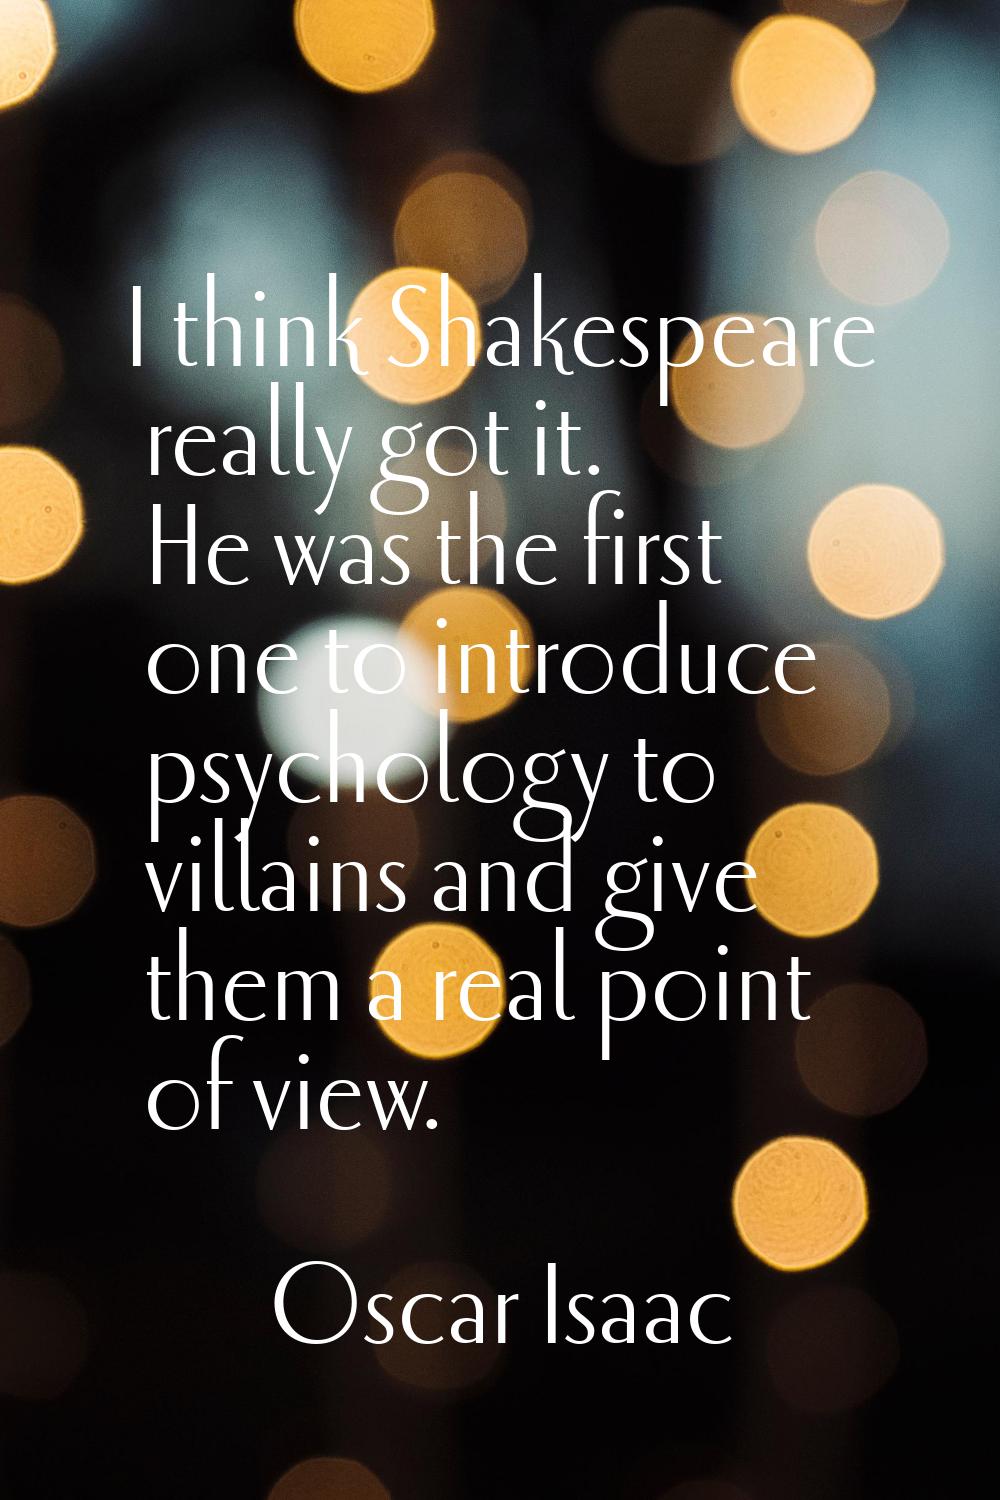 I think Shakespeare really got it. He was the first one to introduce psychology to villains and giv